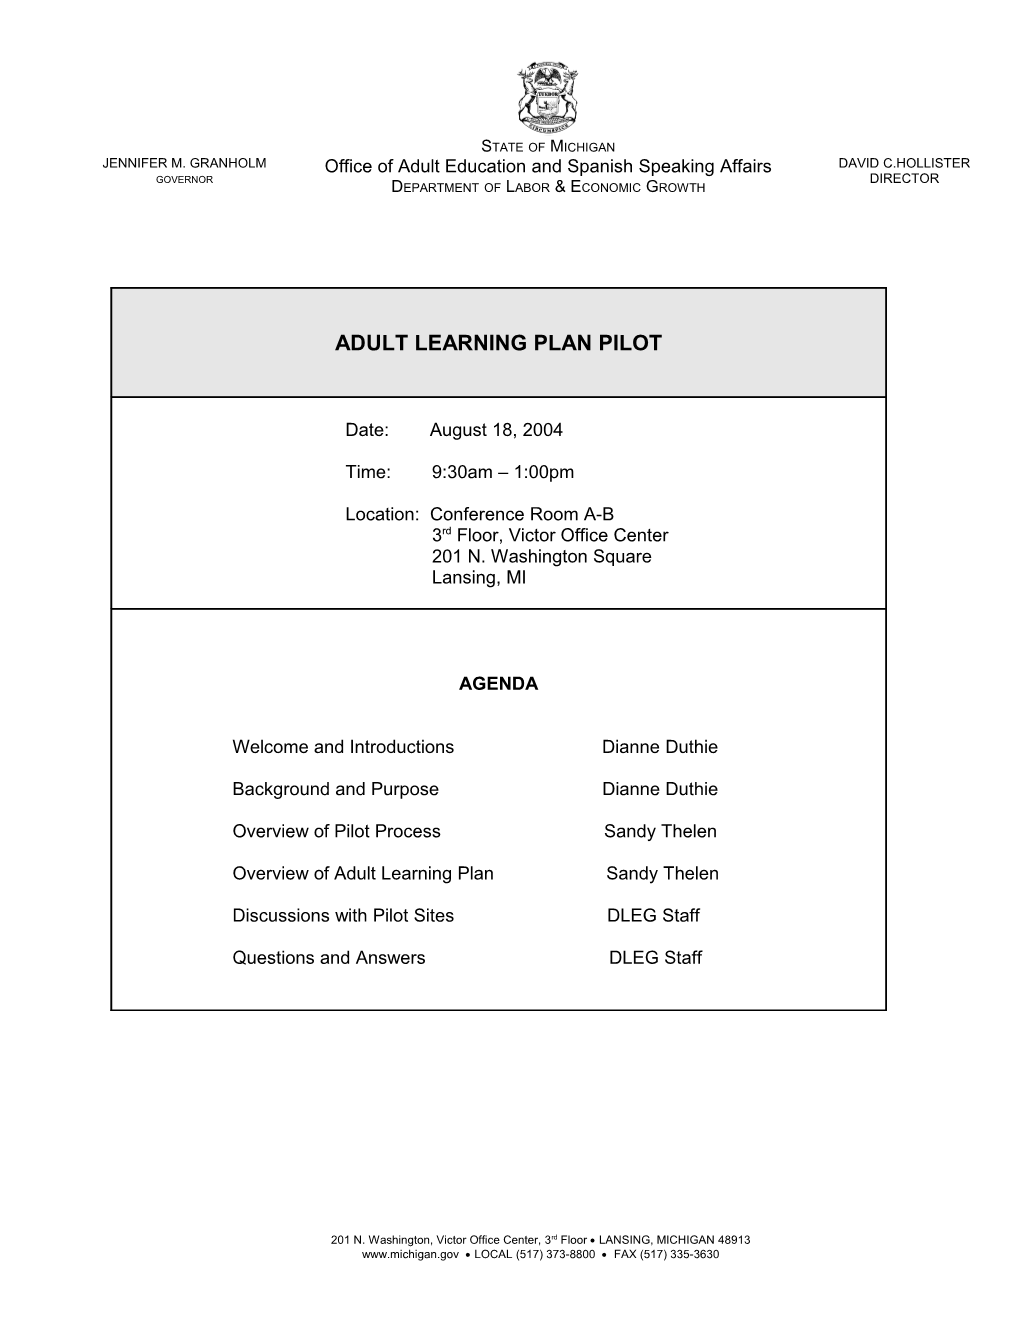 Adult Learning Plan Pilot